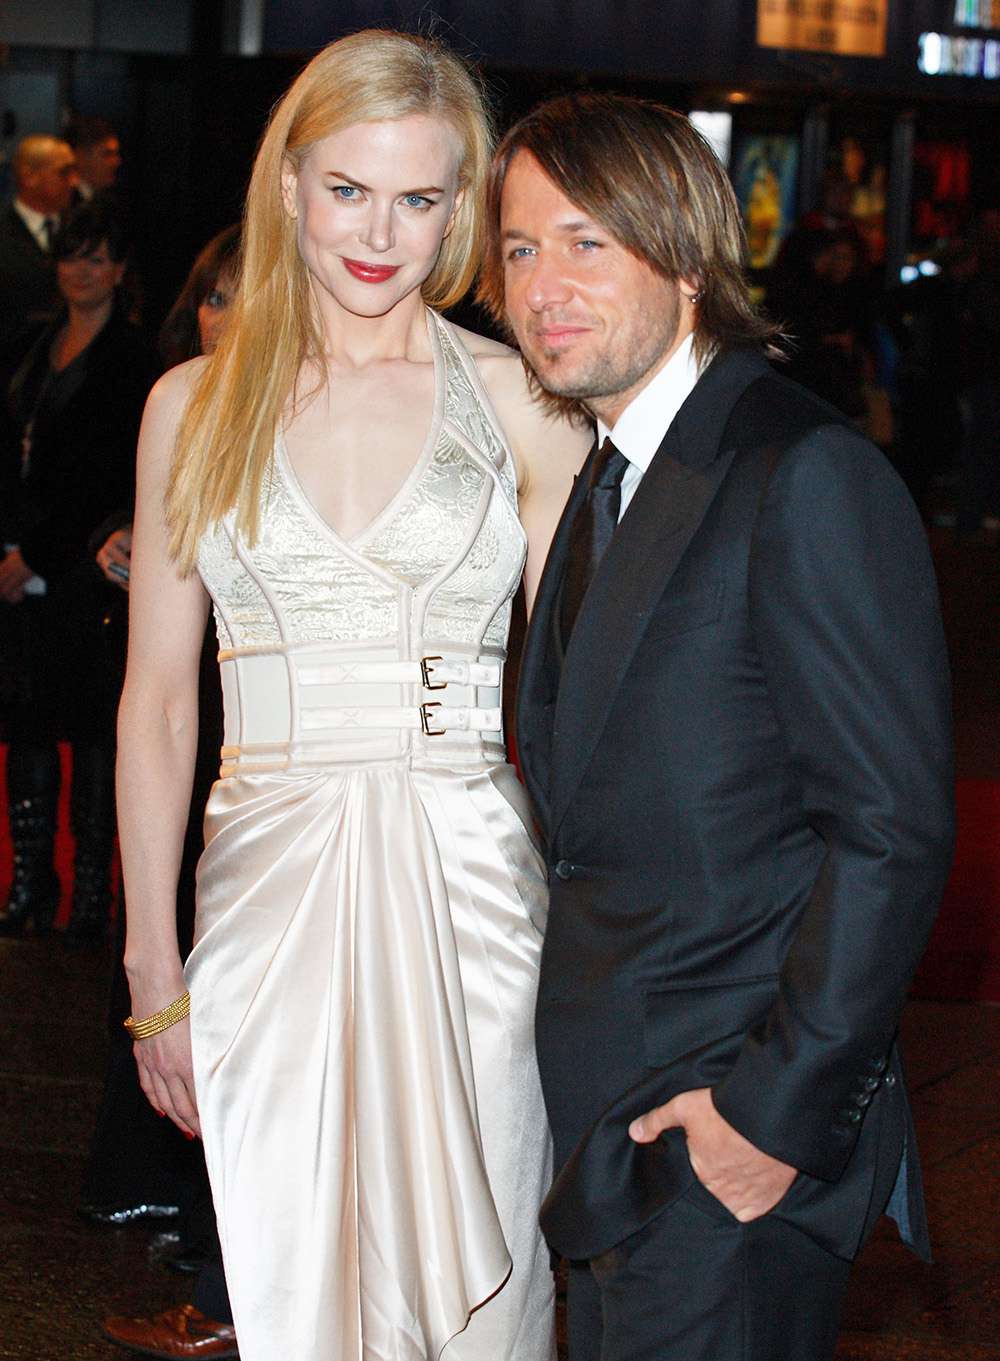 LONDON - NOVEMBER 27:  Nicole Kidman and Keith Urban attend The Golden Compass world premiere held at the Odeon Leicester Square on November 27, 2007 in London, England.  (Photo by Mike Marsland/WireImage)